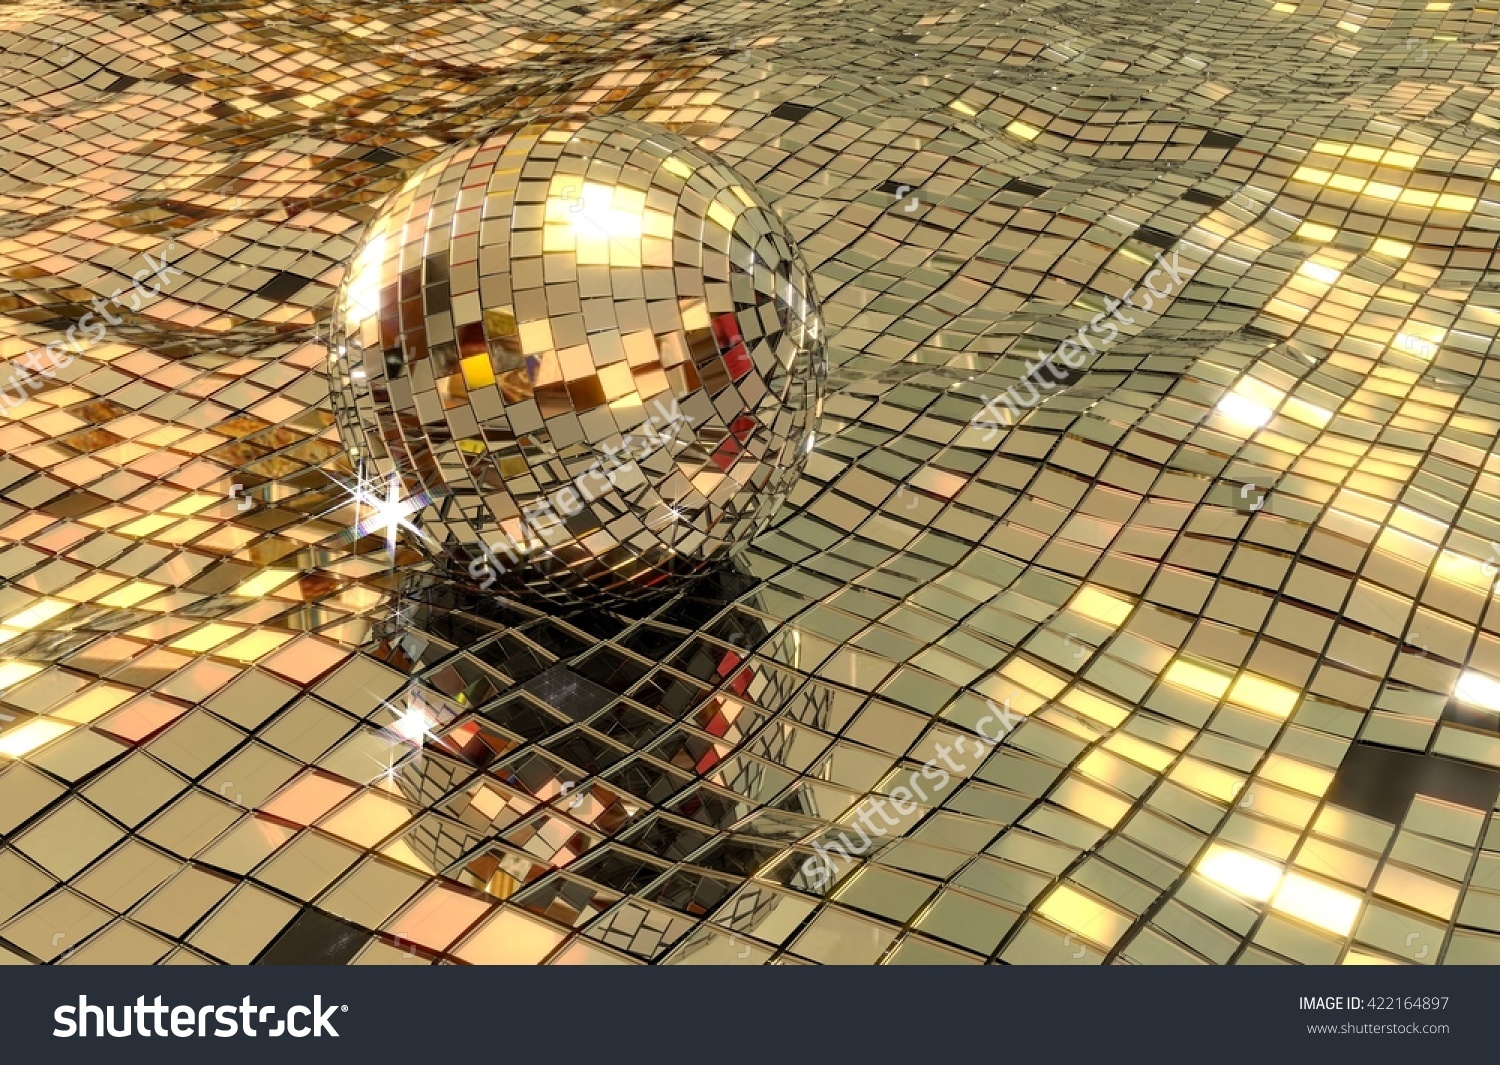 stock-photo-disco-ball-floating-in-disco-sea-d-render-shiny-mirrors-in-wavy-pattern-422164897